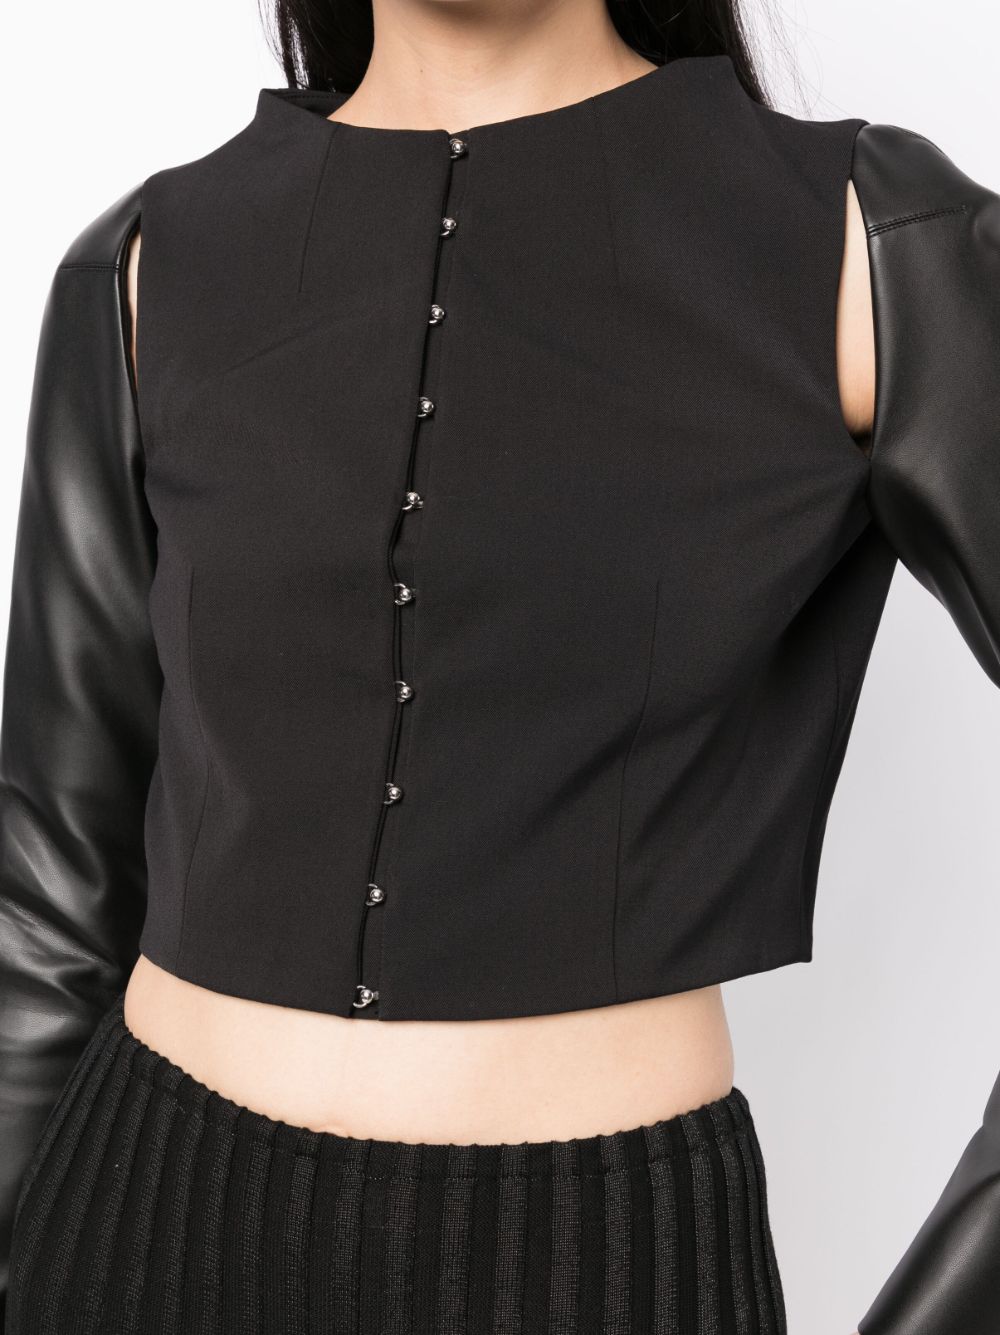 Del-Core-Tailored-Top-With-Leather-Sleeve-Black-5